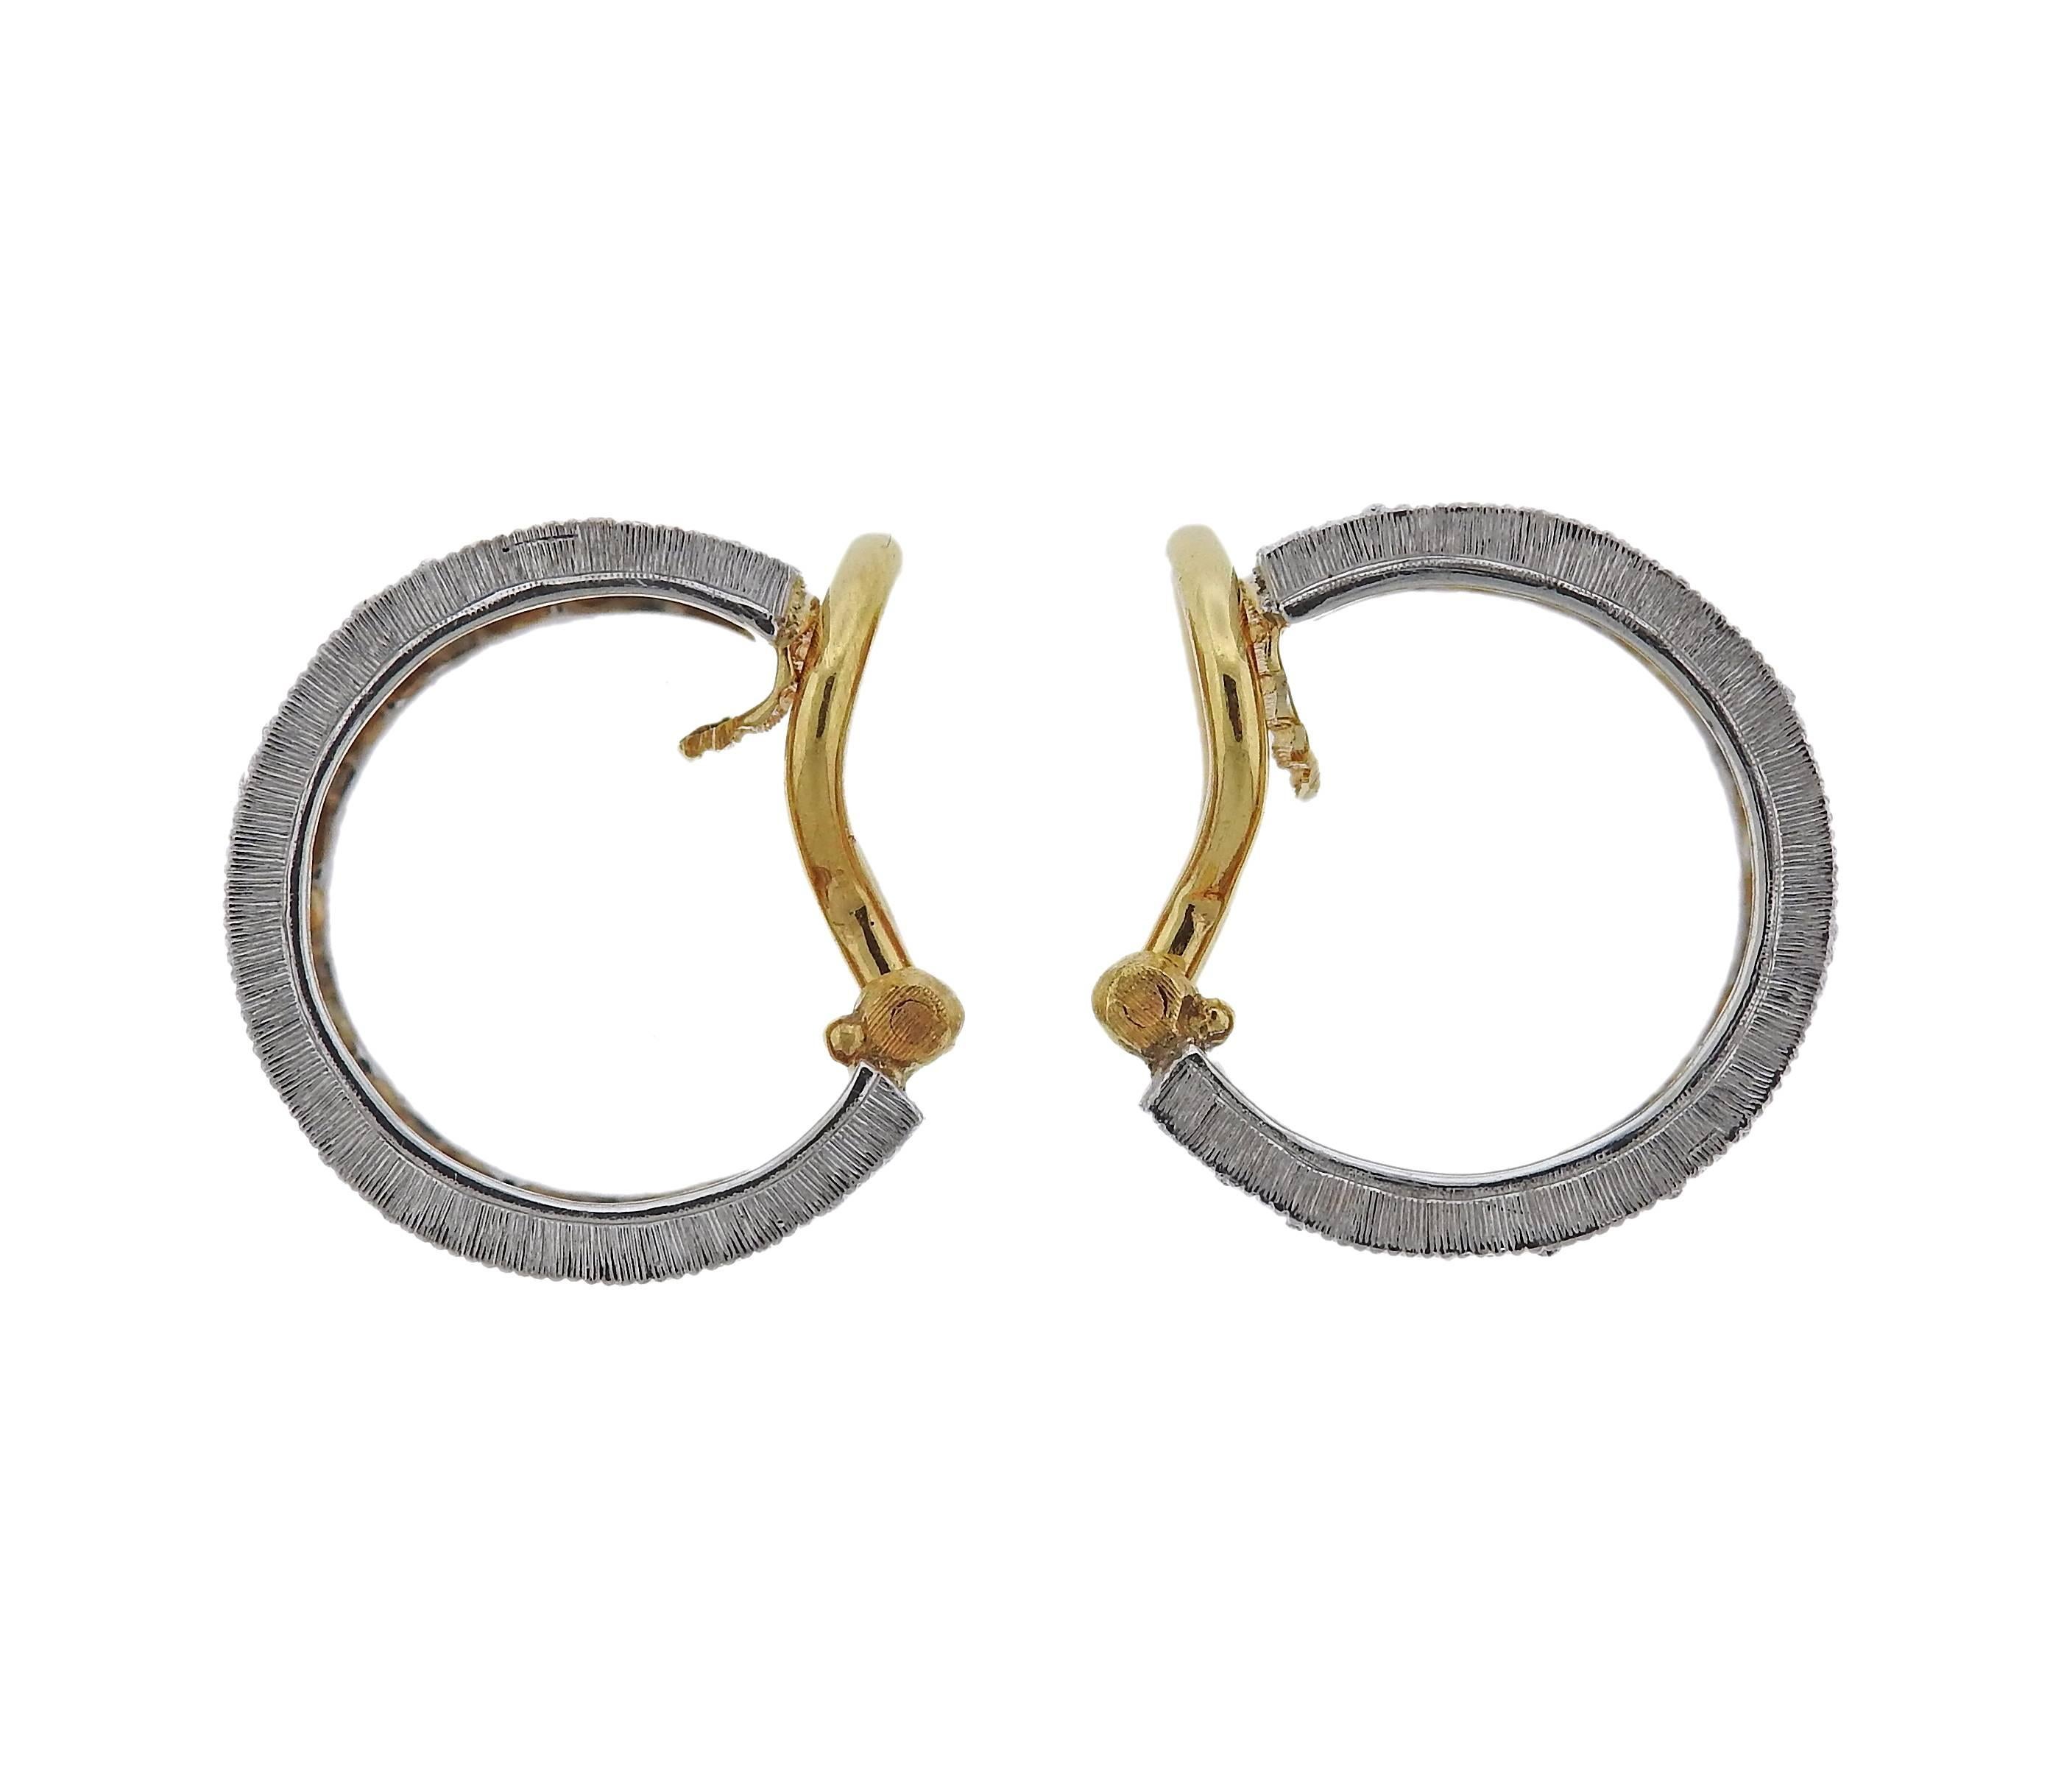 A pair of 18k gold hoop earrings crafted by Buccellati. Earrings feature approximately 0.85ctw of H/VS diamonds. Earrings measure 16mm in diameter and 9.5mm wide. Marked Q3061, 18k, Buccellati , Italy . Weight is 10.3 grams. Retail for $23200 come